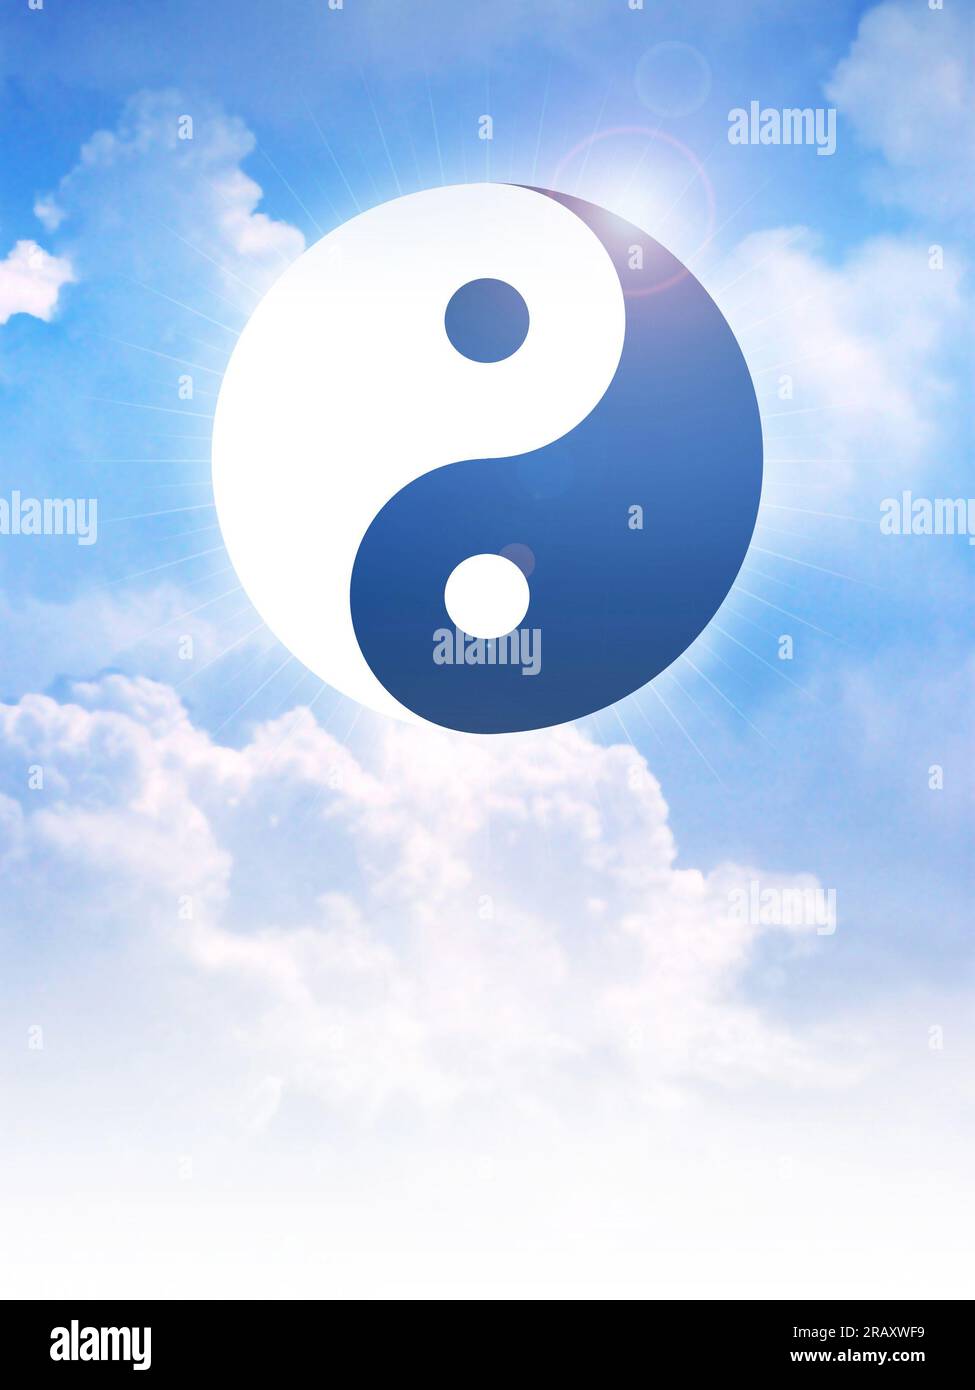 Yin and Yang symbol of Taoism on clouds Stock Photo